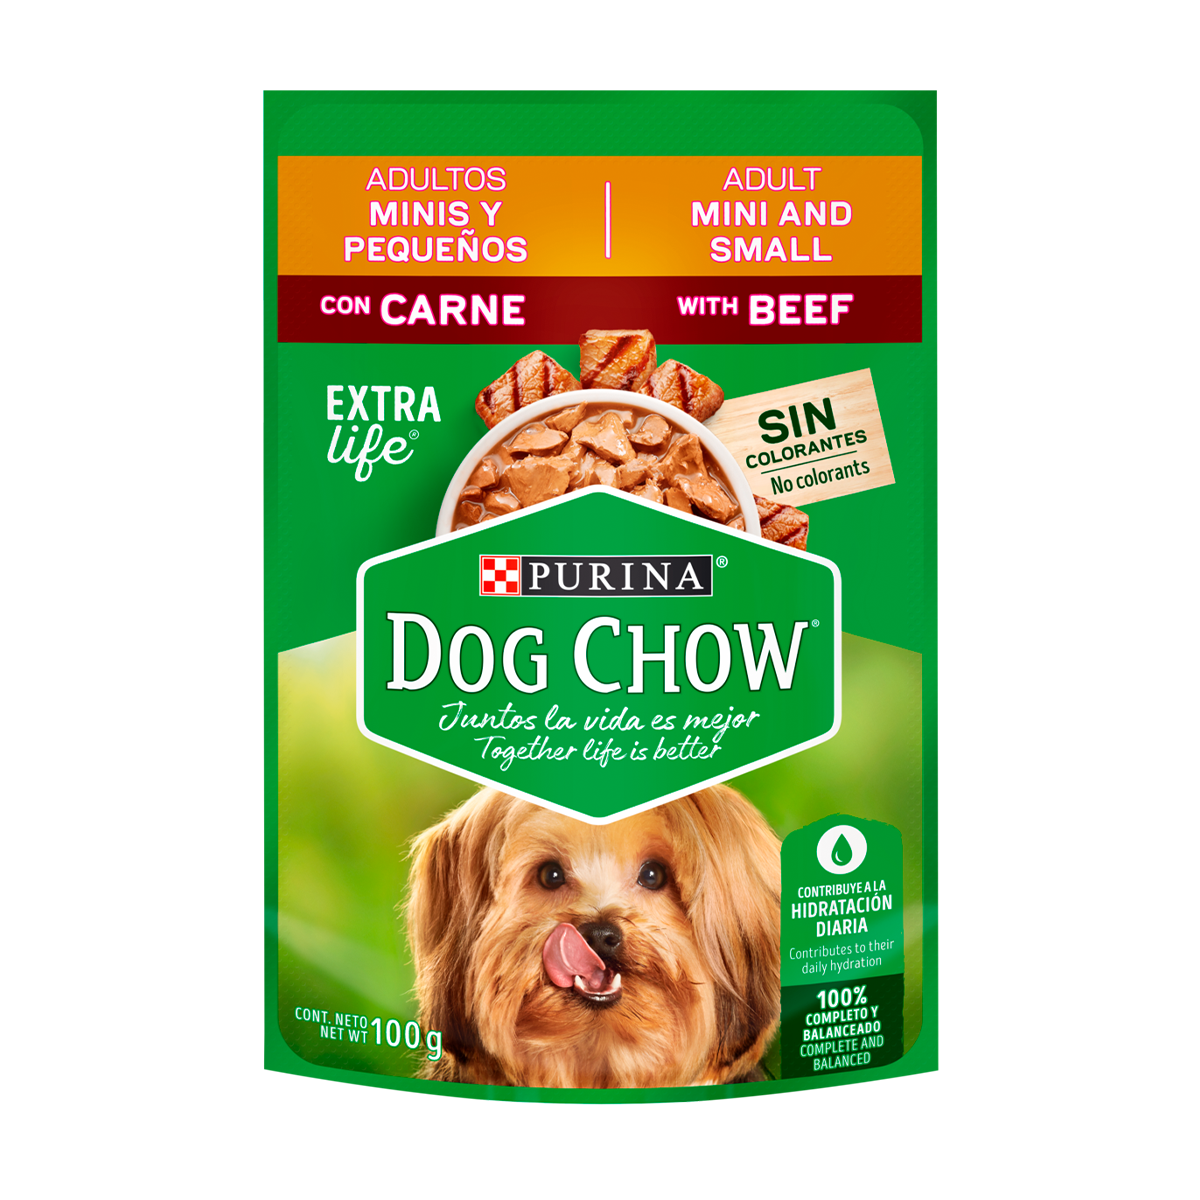 purina-dog-chow-adultos-minis-y-peque%C3%B1os-con-carne.png